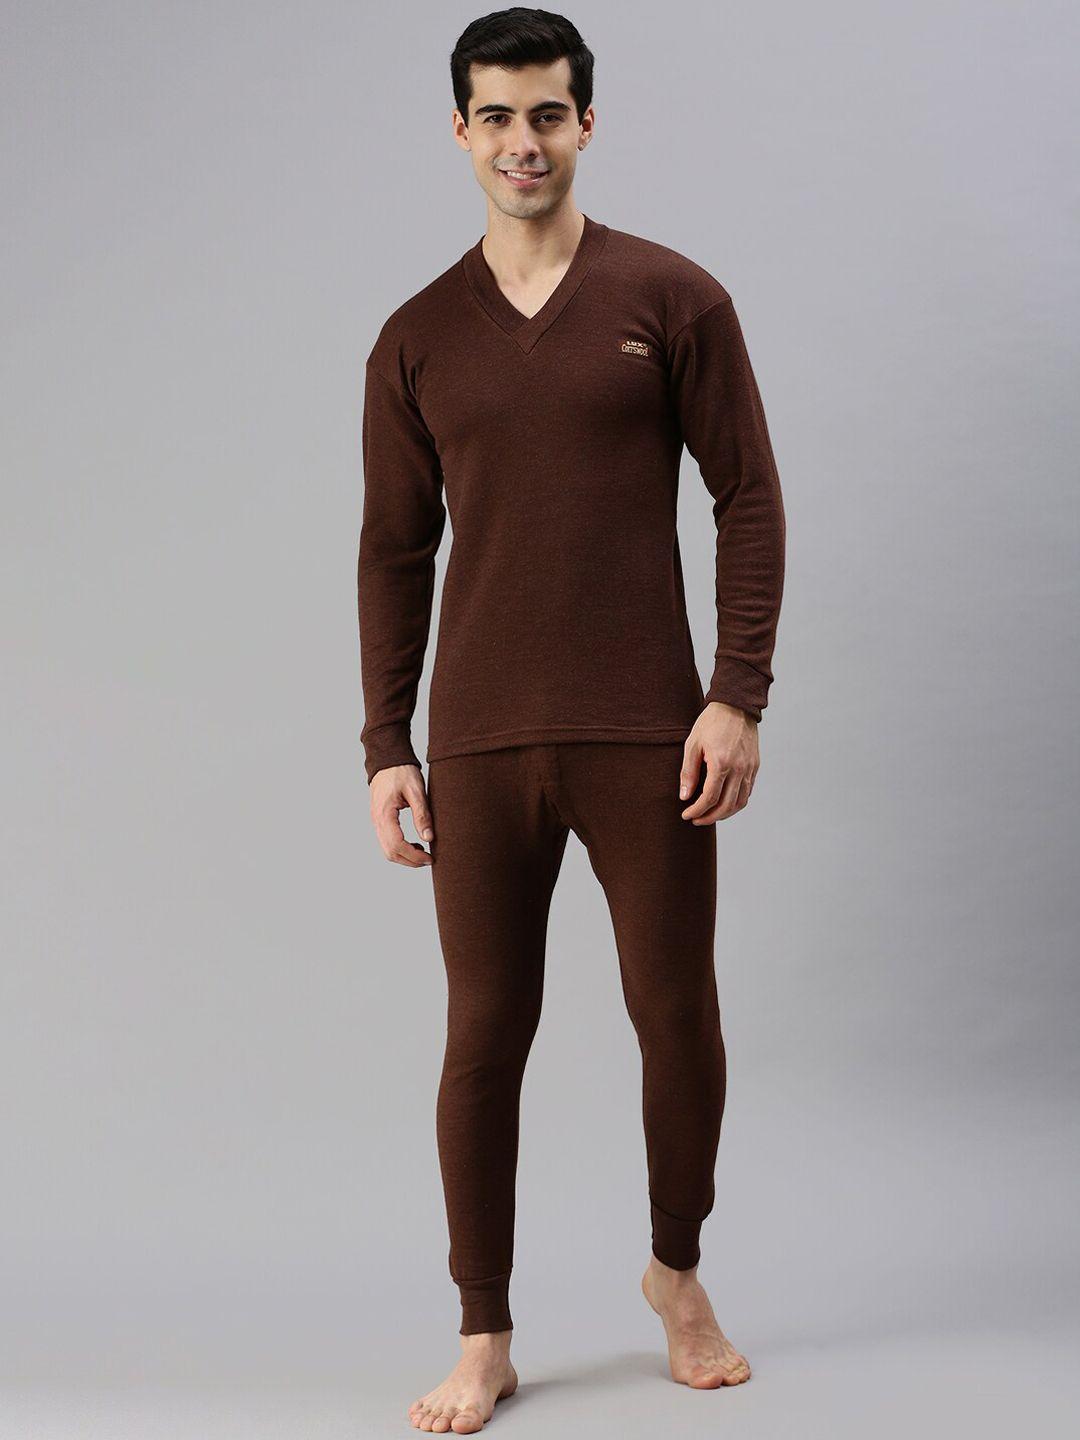 lux-cottswool-men-plus-size-brown-solid-cotton-thermal-set